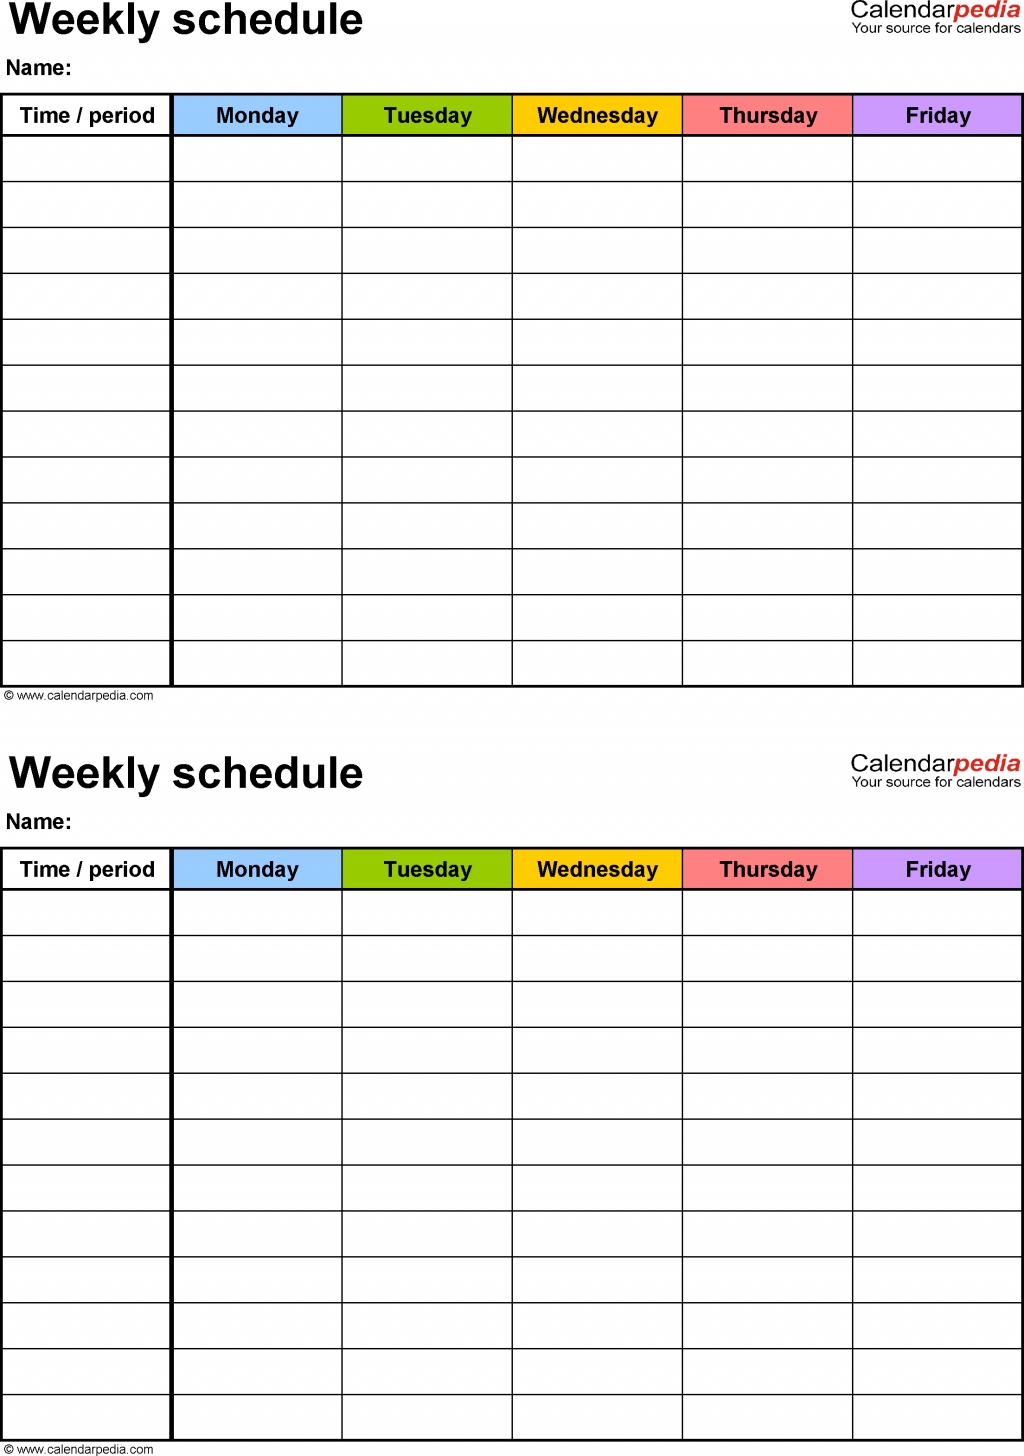 Monthly Plan Excel Template Sign Up Sheet Pdf Schedule Google Docs intended for Blank Copy Of Monthly Sign Up Sheet Calendar Schedule